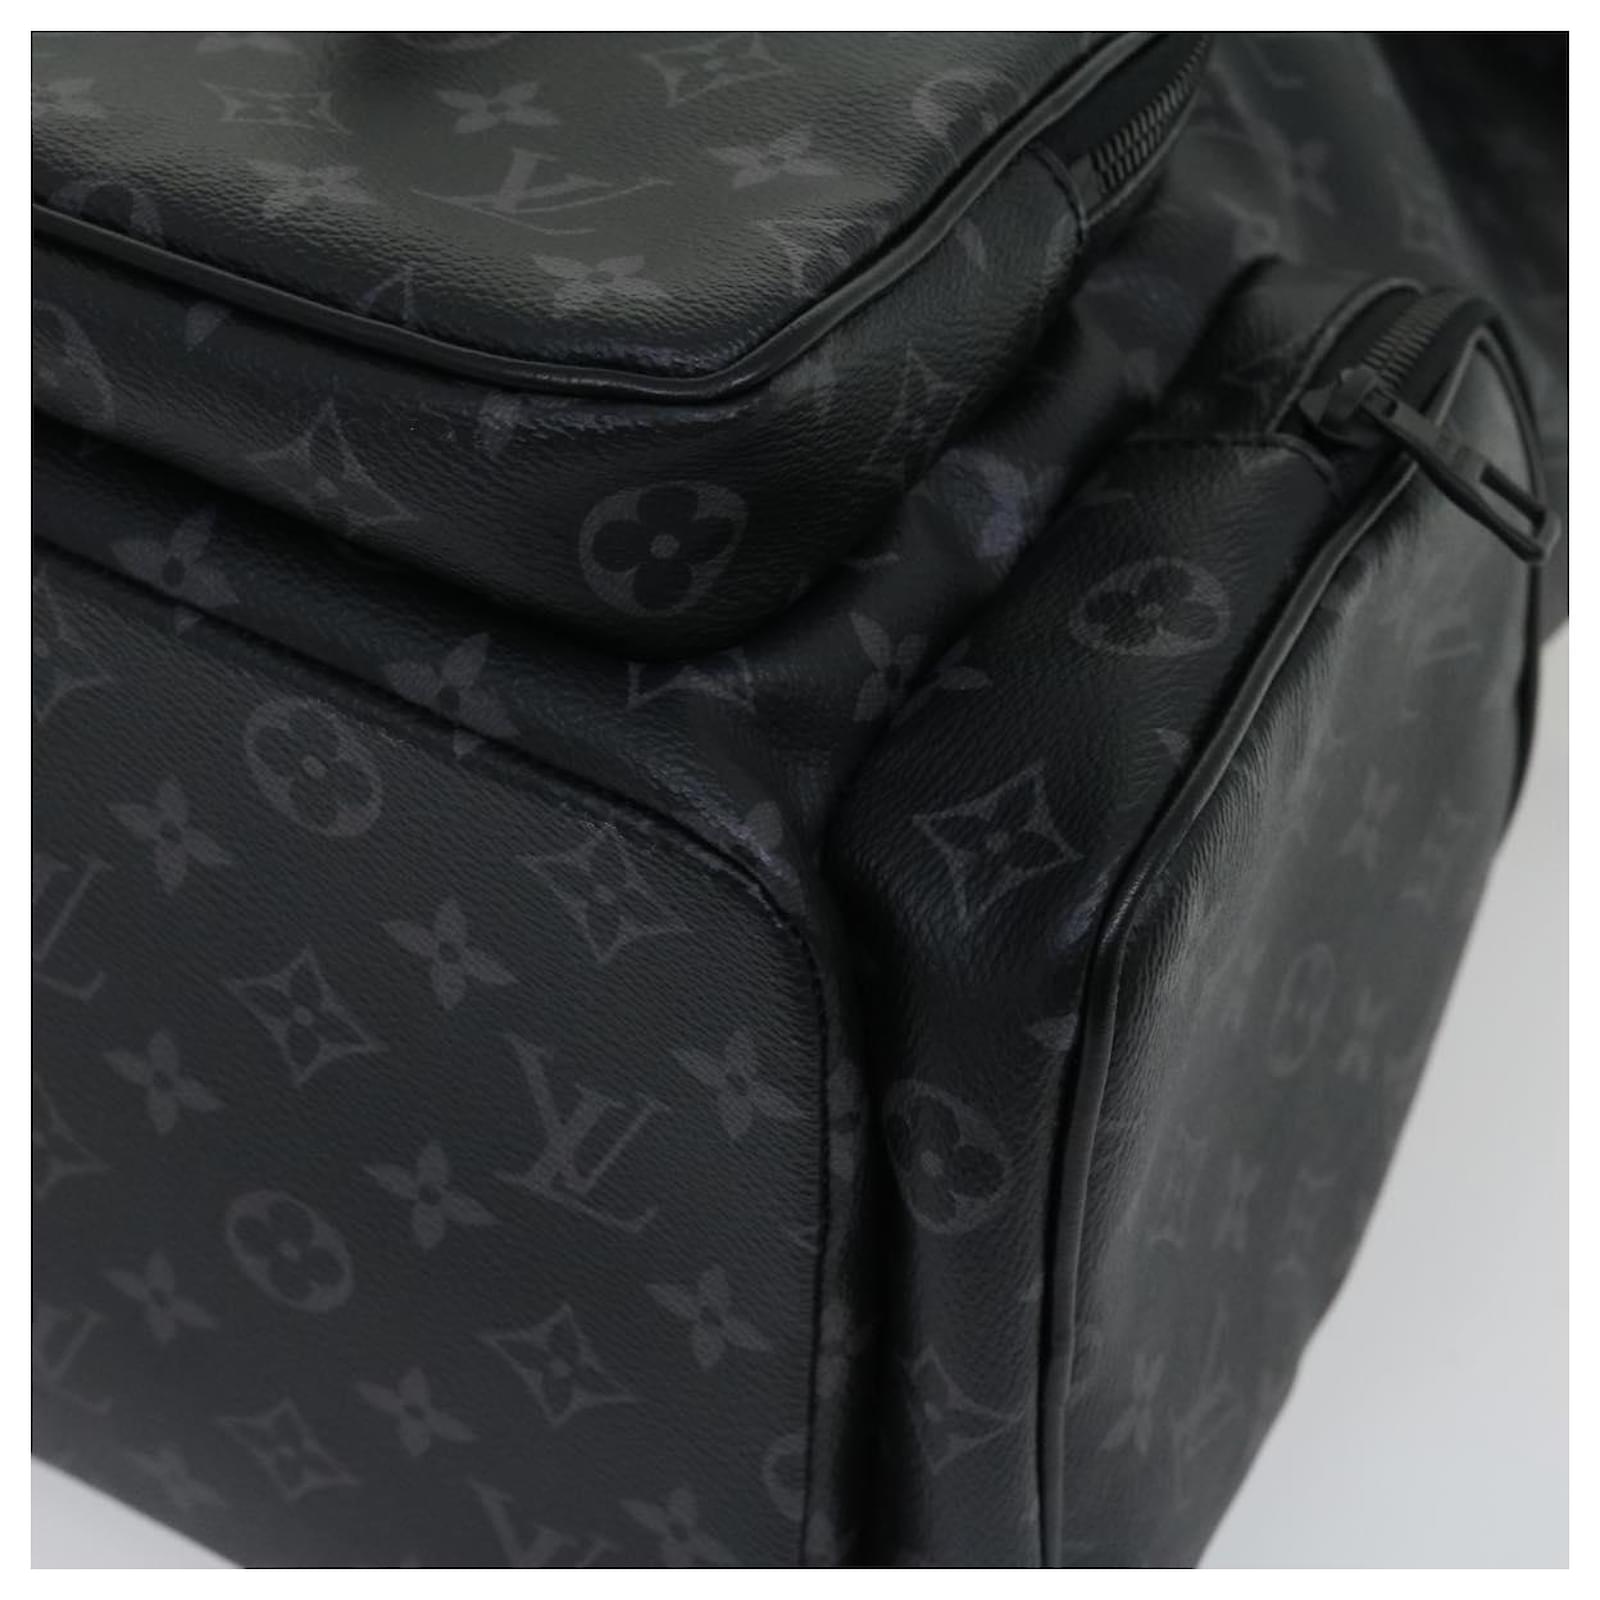 LOUIS VUITTON Monogram Eclipse Trio Backpack Backpack M45538 LV